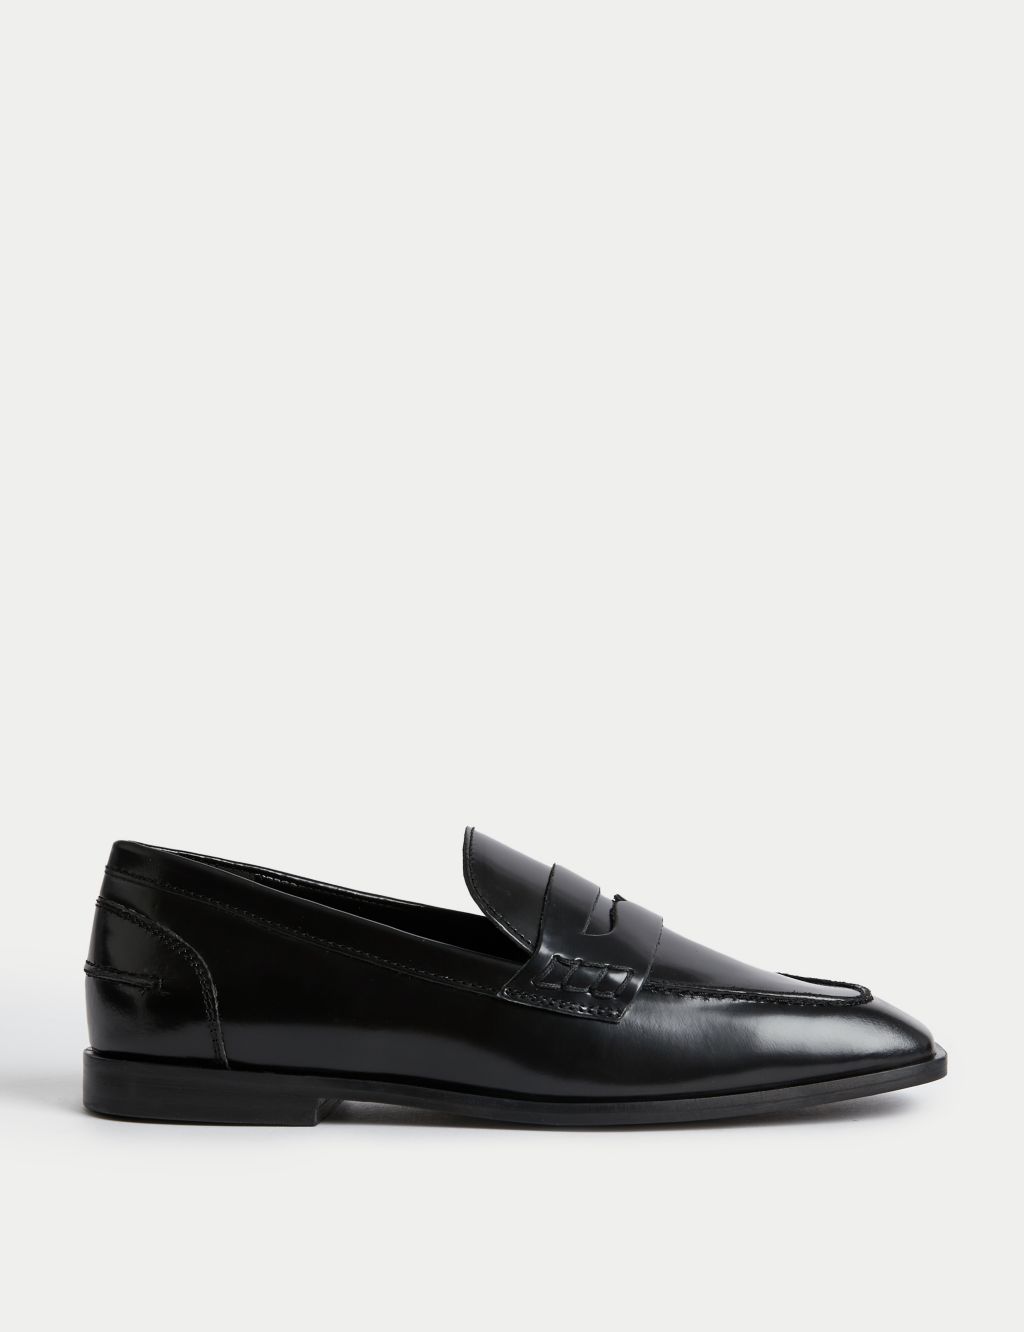 Leather Flat Square Toe Loafers image 1